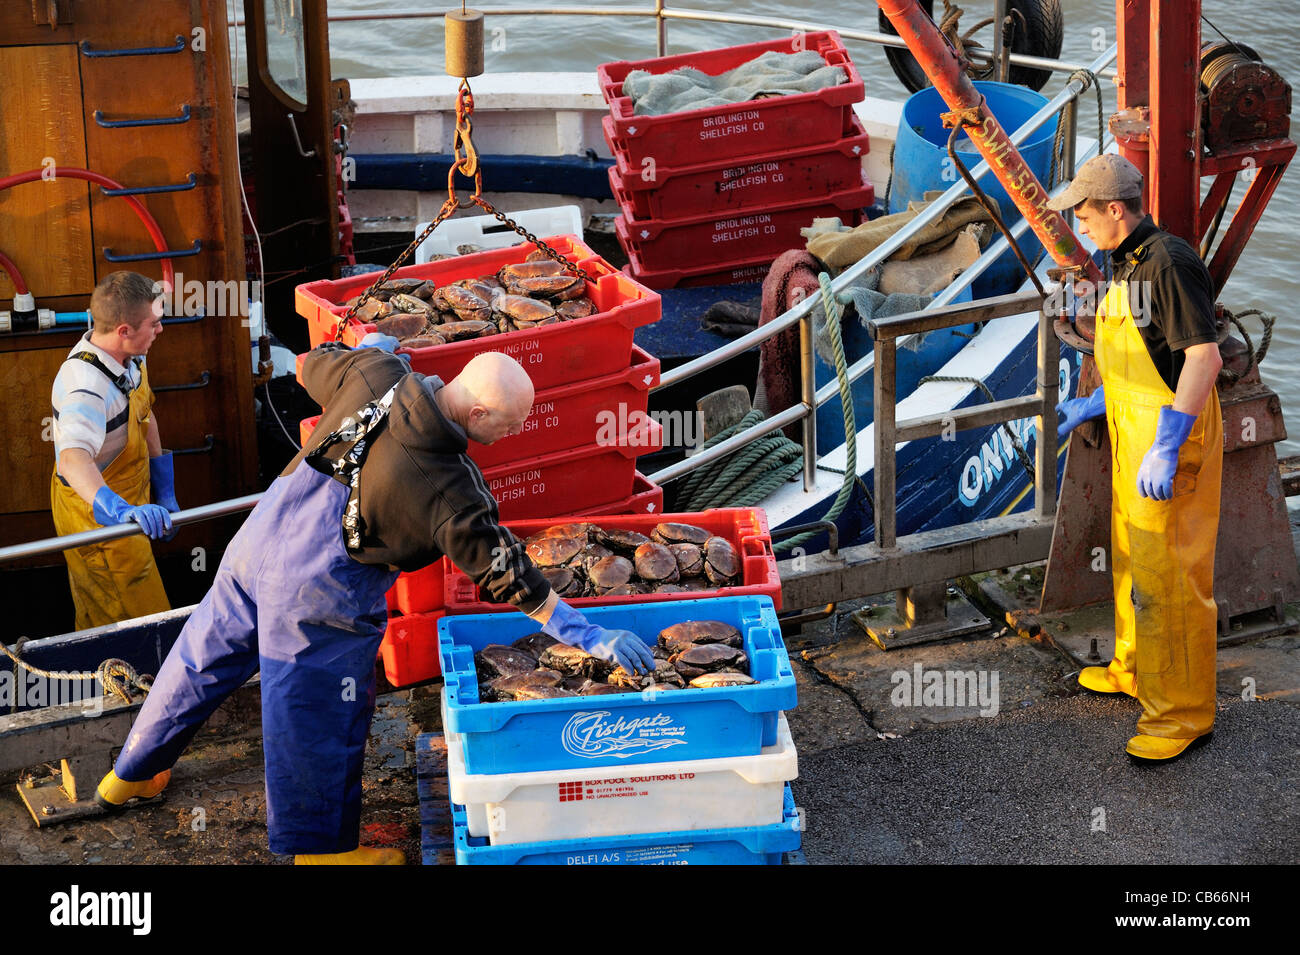 North Sea fishermen unload catch of crabs from fishing boat Onward Star at the East Yorkshire fish quay harbour of Bridlington Stock Photo